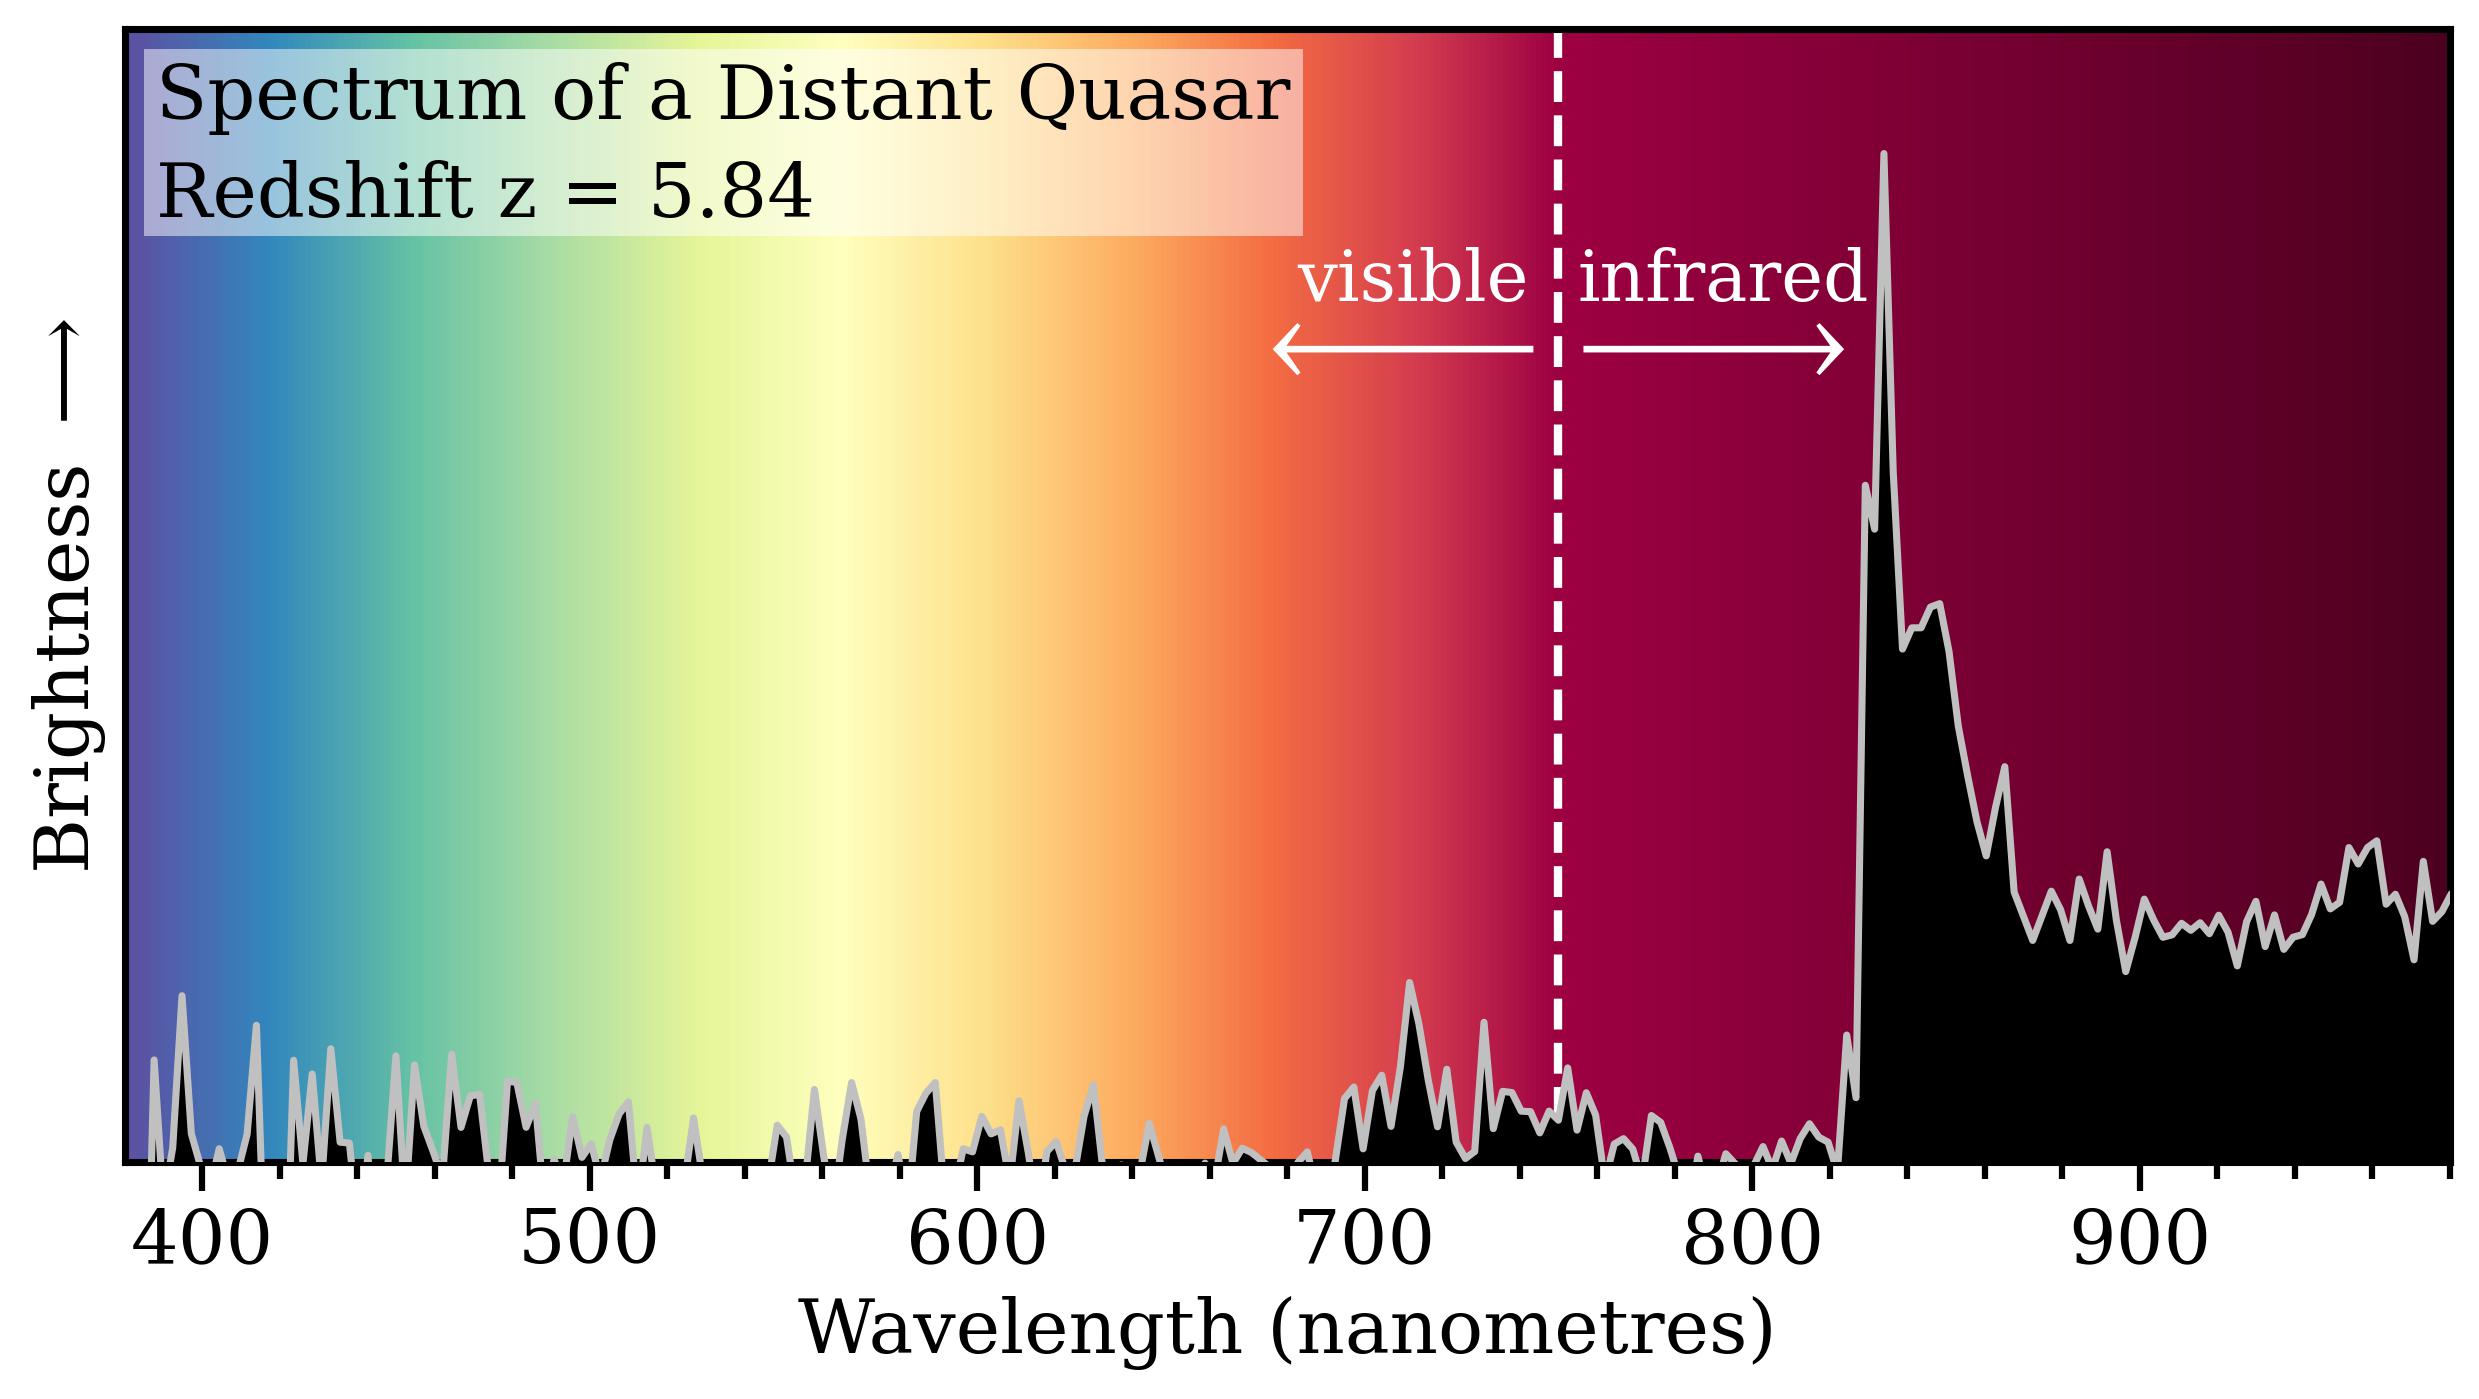 Spectrum image from quasar. This spectrum is from an incredibly distant quasar more than 12 billion light-years from Earth. The universe’s expansion has stretched the light’s wavelength and shifted it into the infrared.